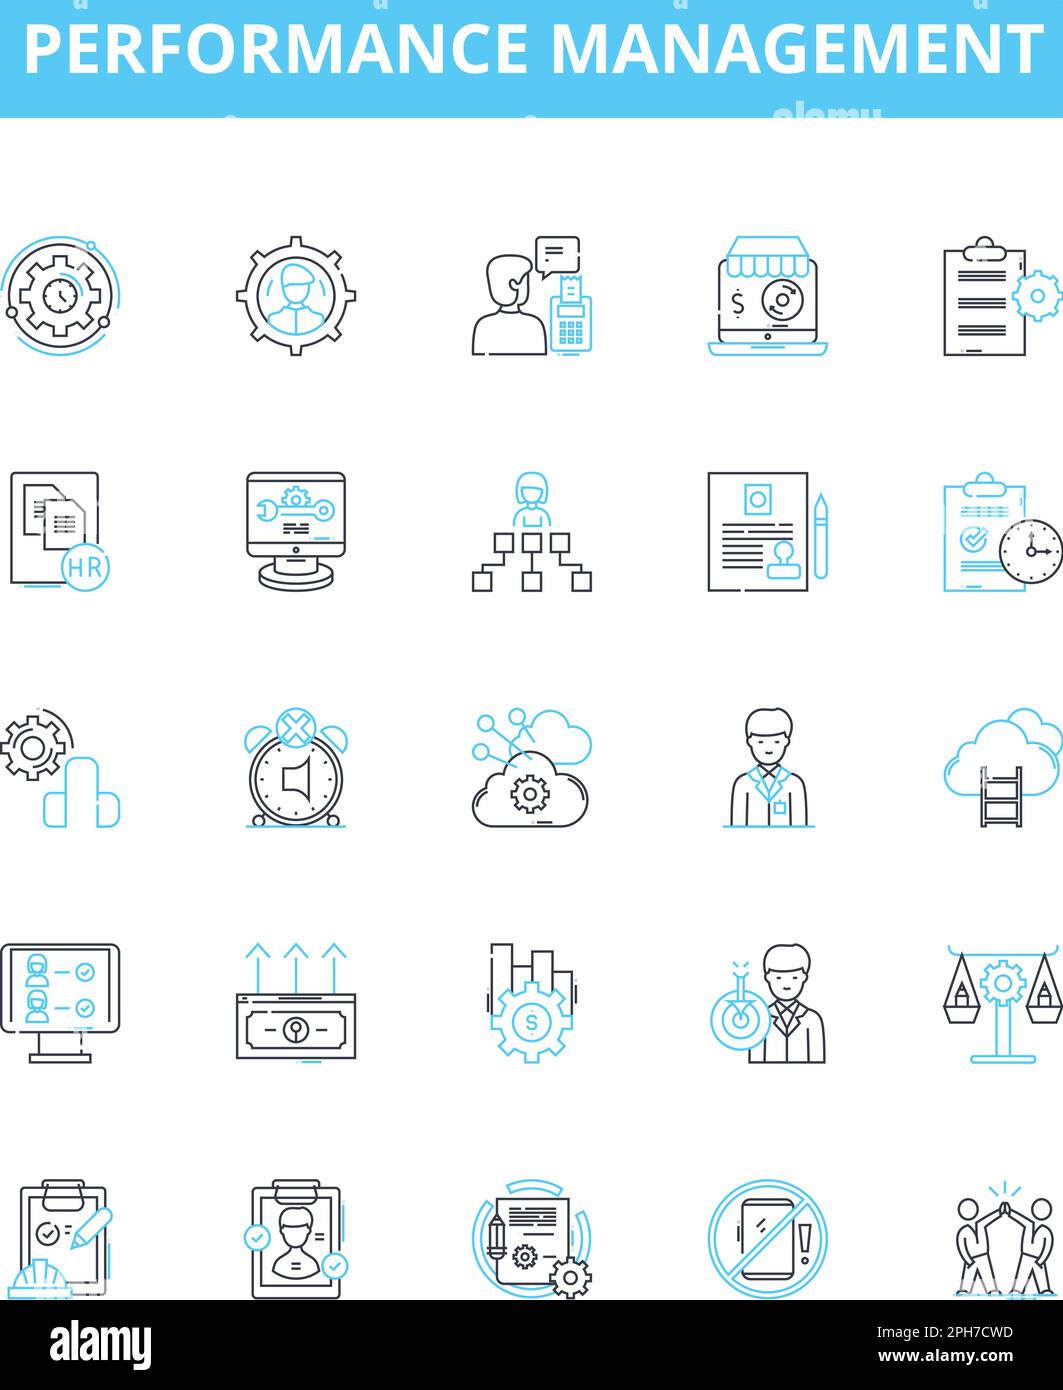 Performance management vector line icons set. Performance, Management, Assessment, Appraisal, measurement, Monitoring, Evaluation illustration outline Stock Vector